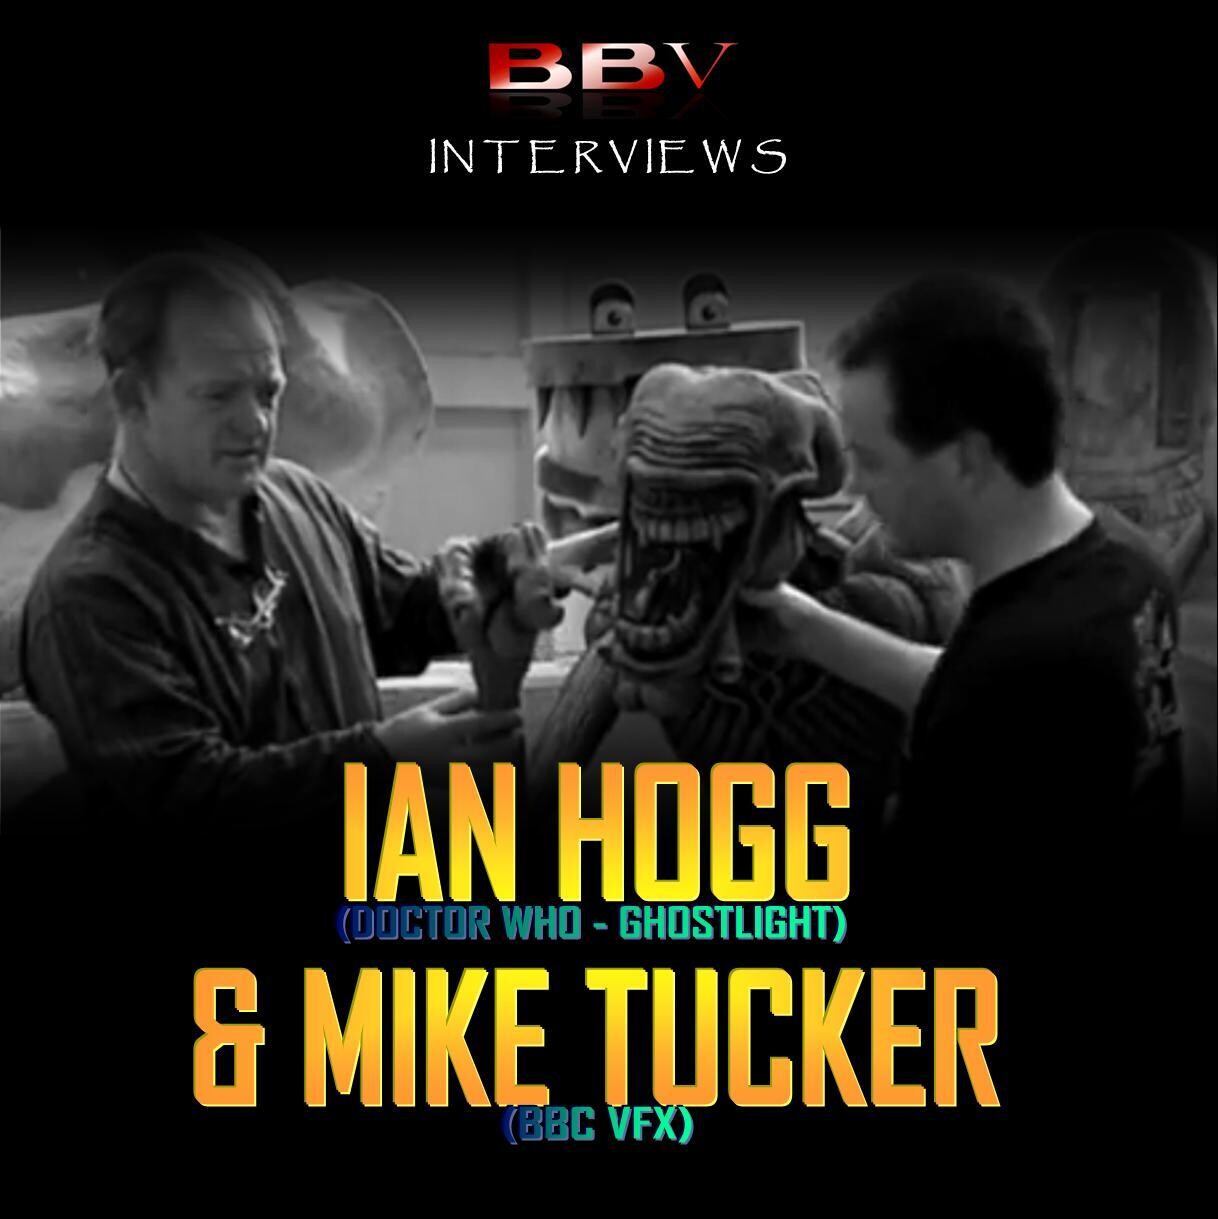 The Doctors -Extras: Ian Hogg & Mike Tucker Interview (VIDEO DOWNLOAD)